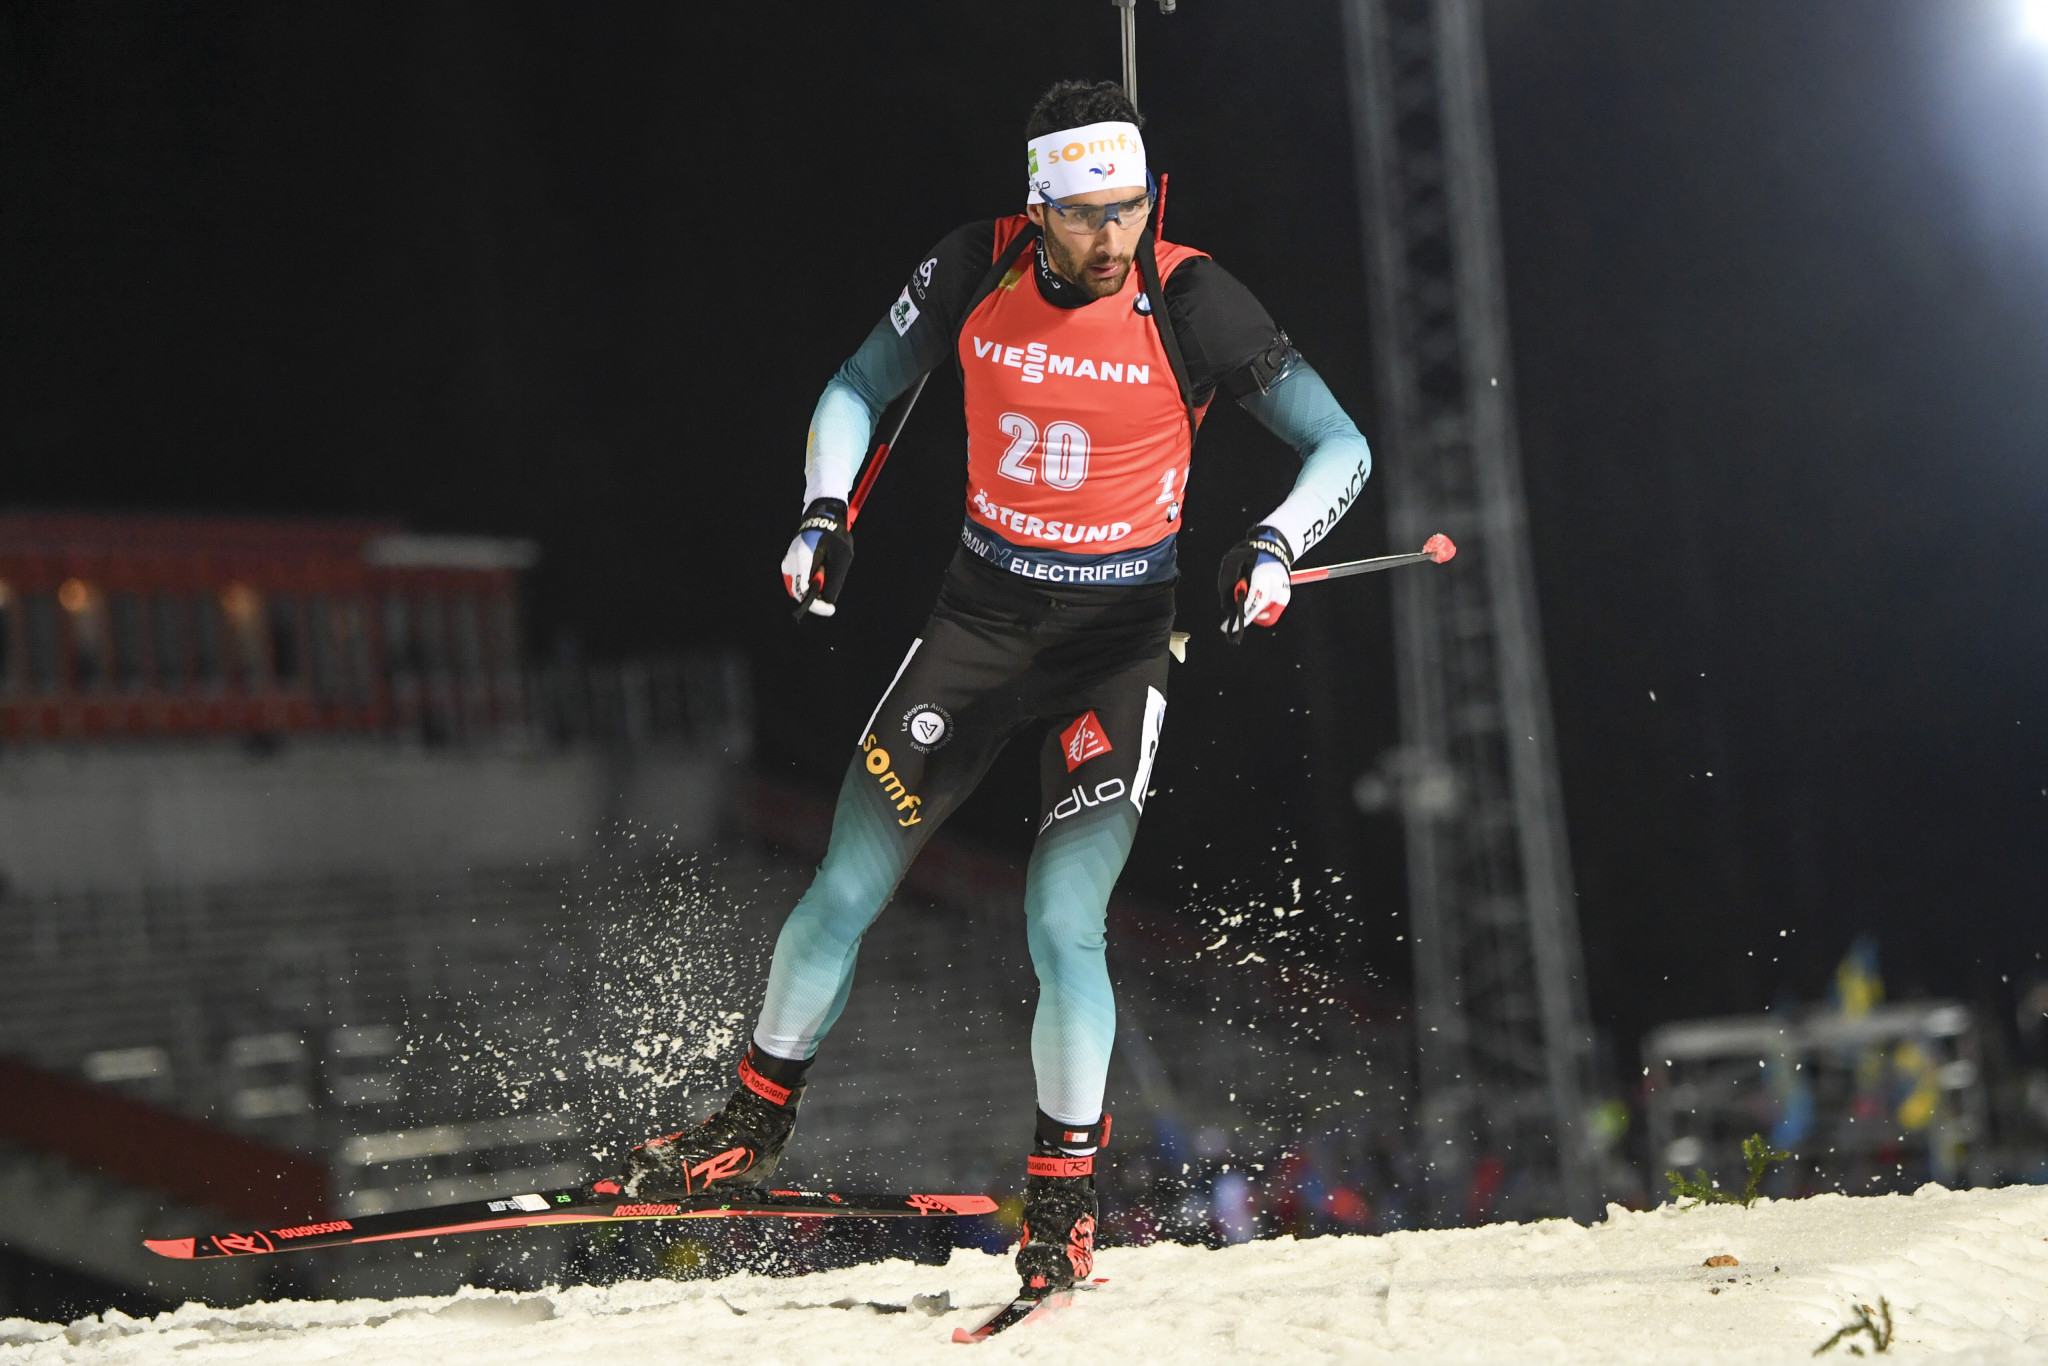 Fourcade and Wierer out to extend leads at IBU World Cup in Hochfilzen